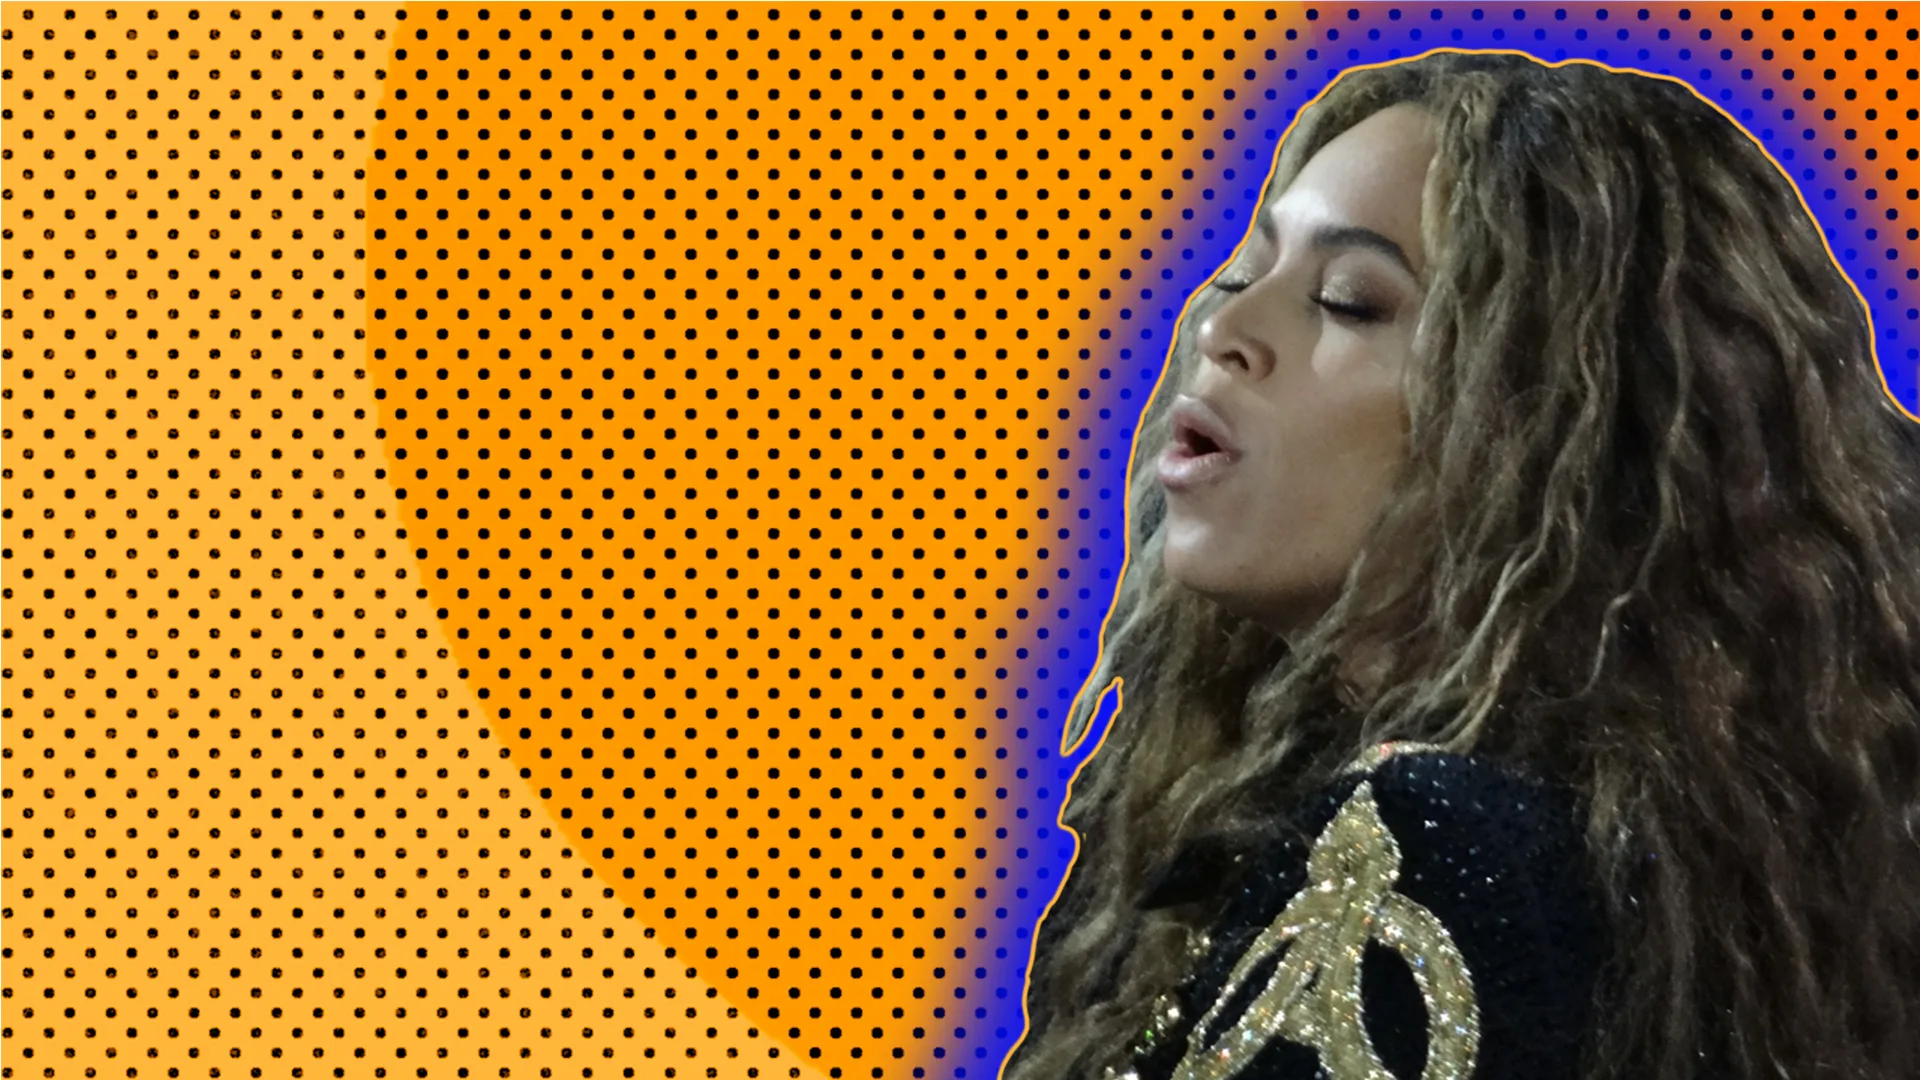 Beyonce singing - in graphic house style